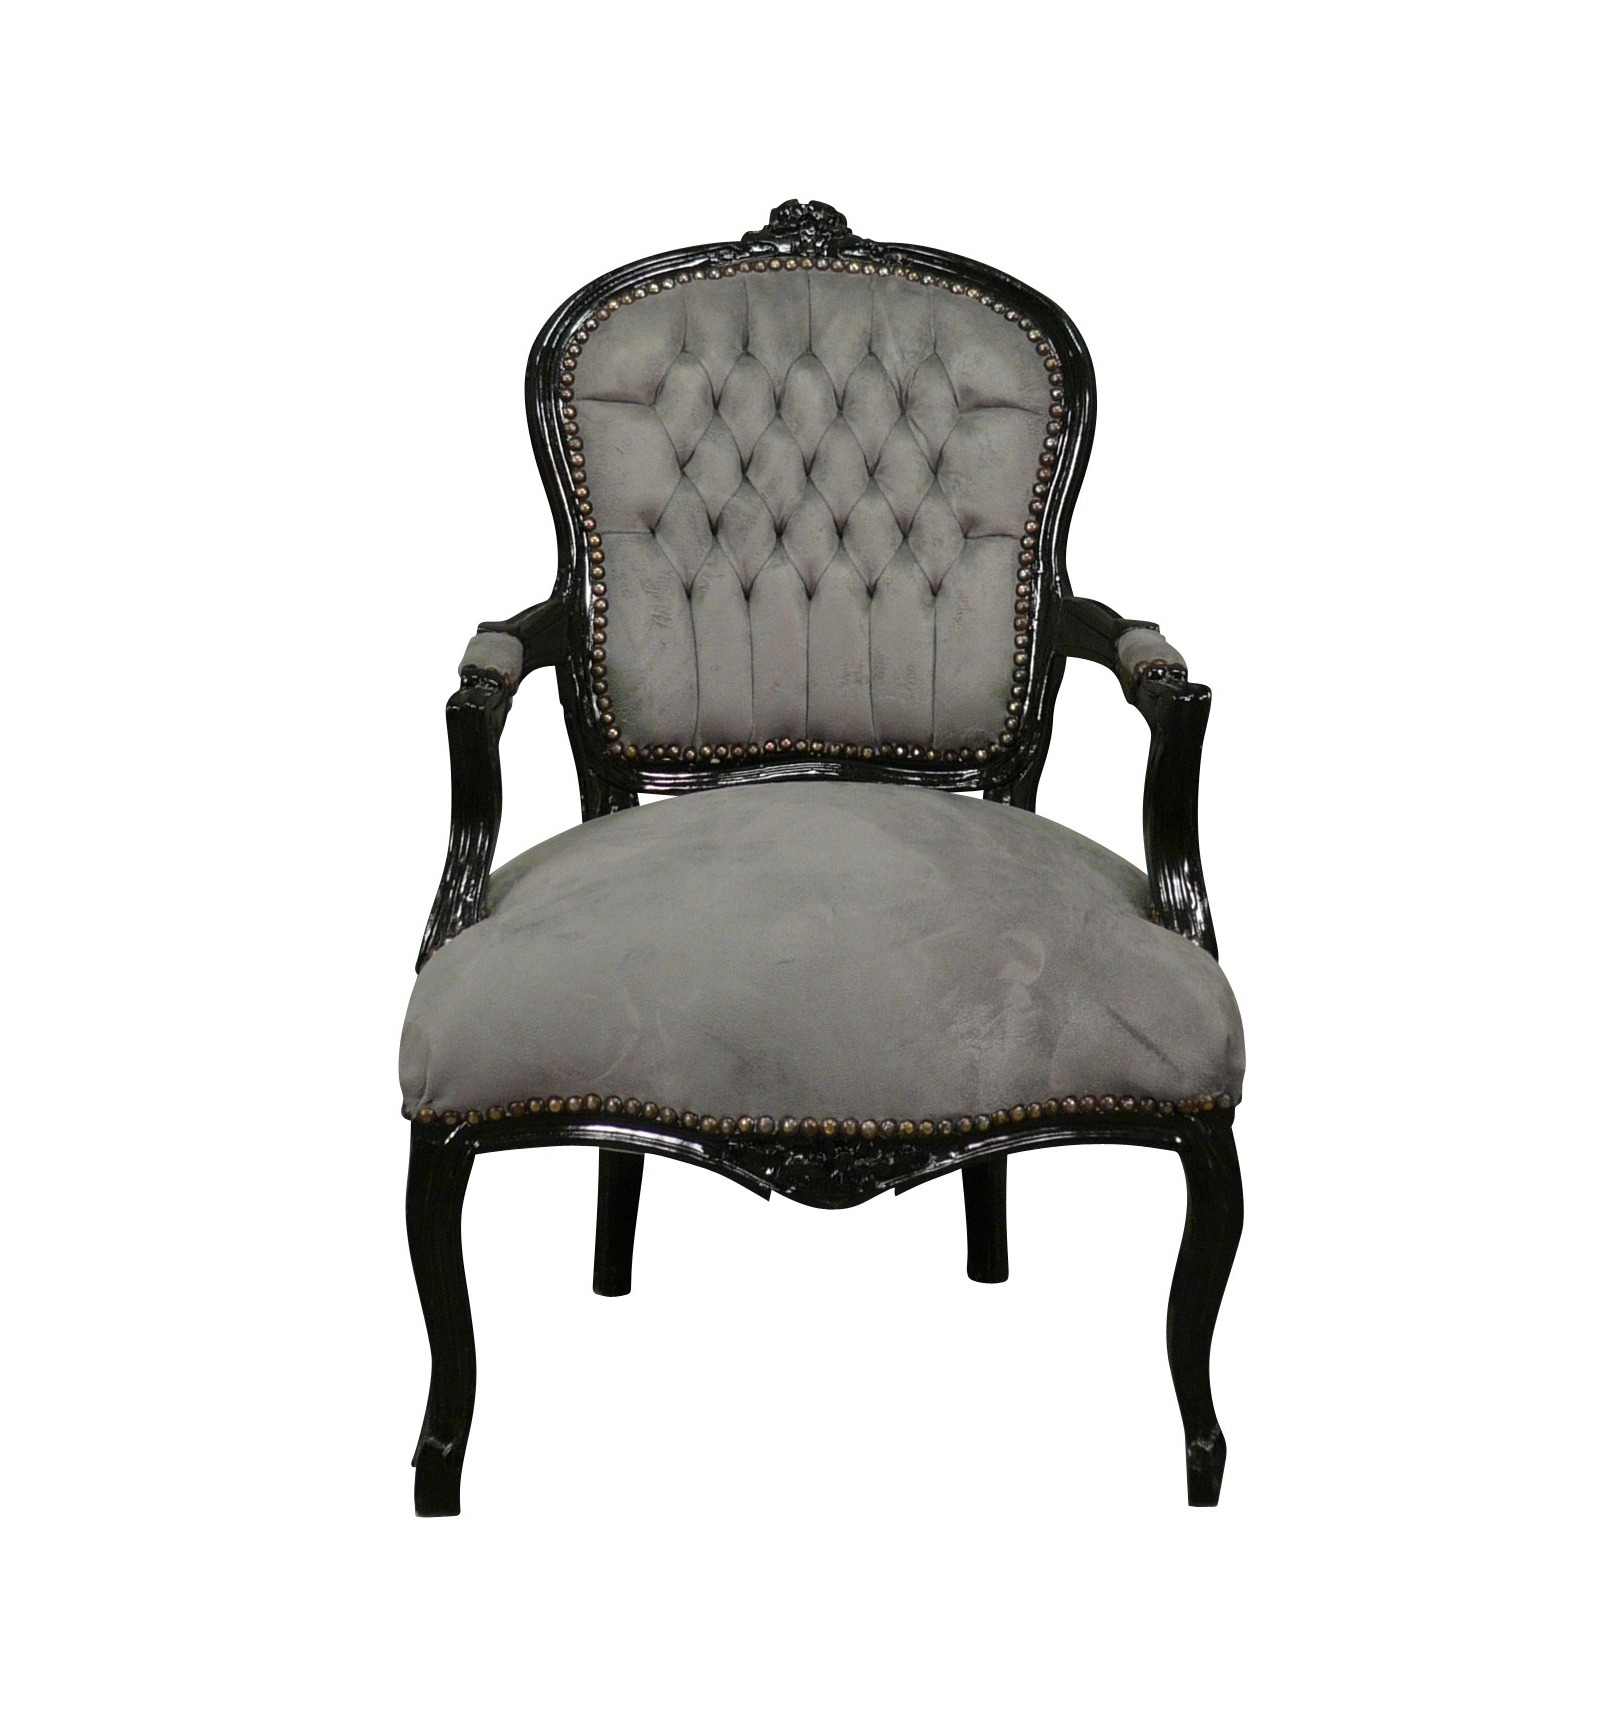 Baroque armchair Louis XV style with black floral fabric, black wood